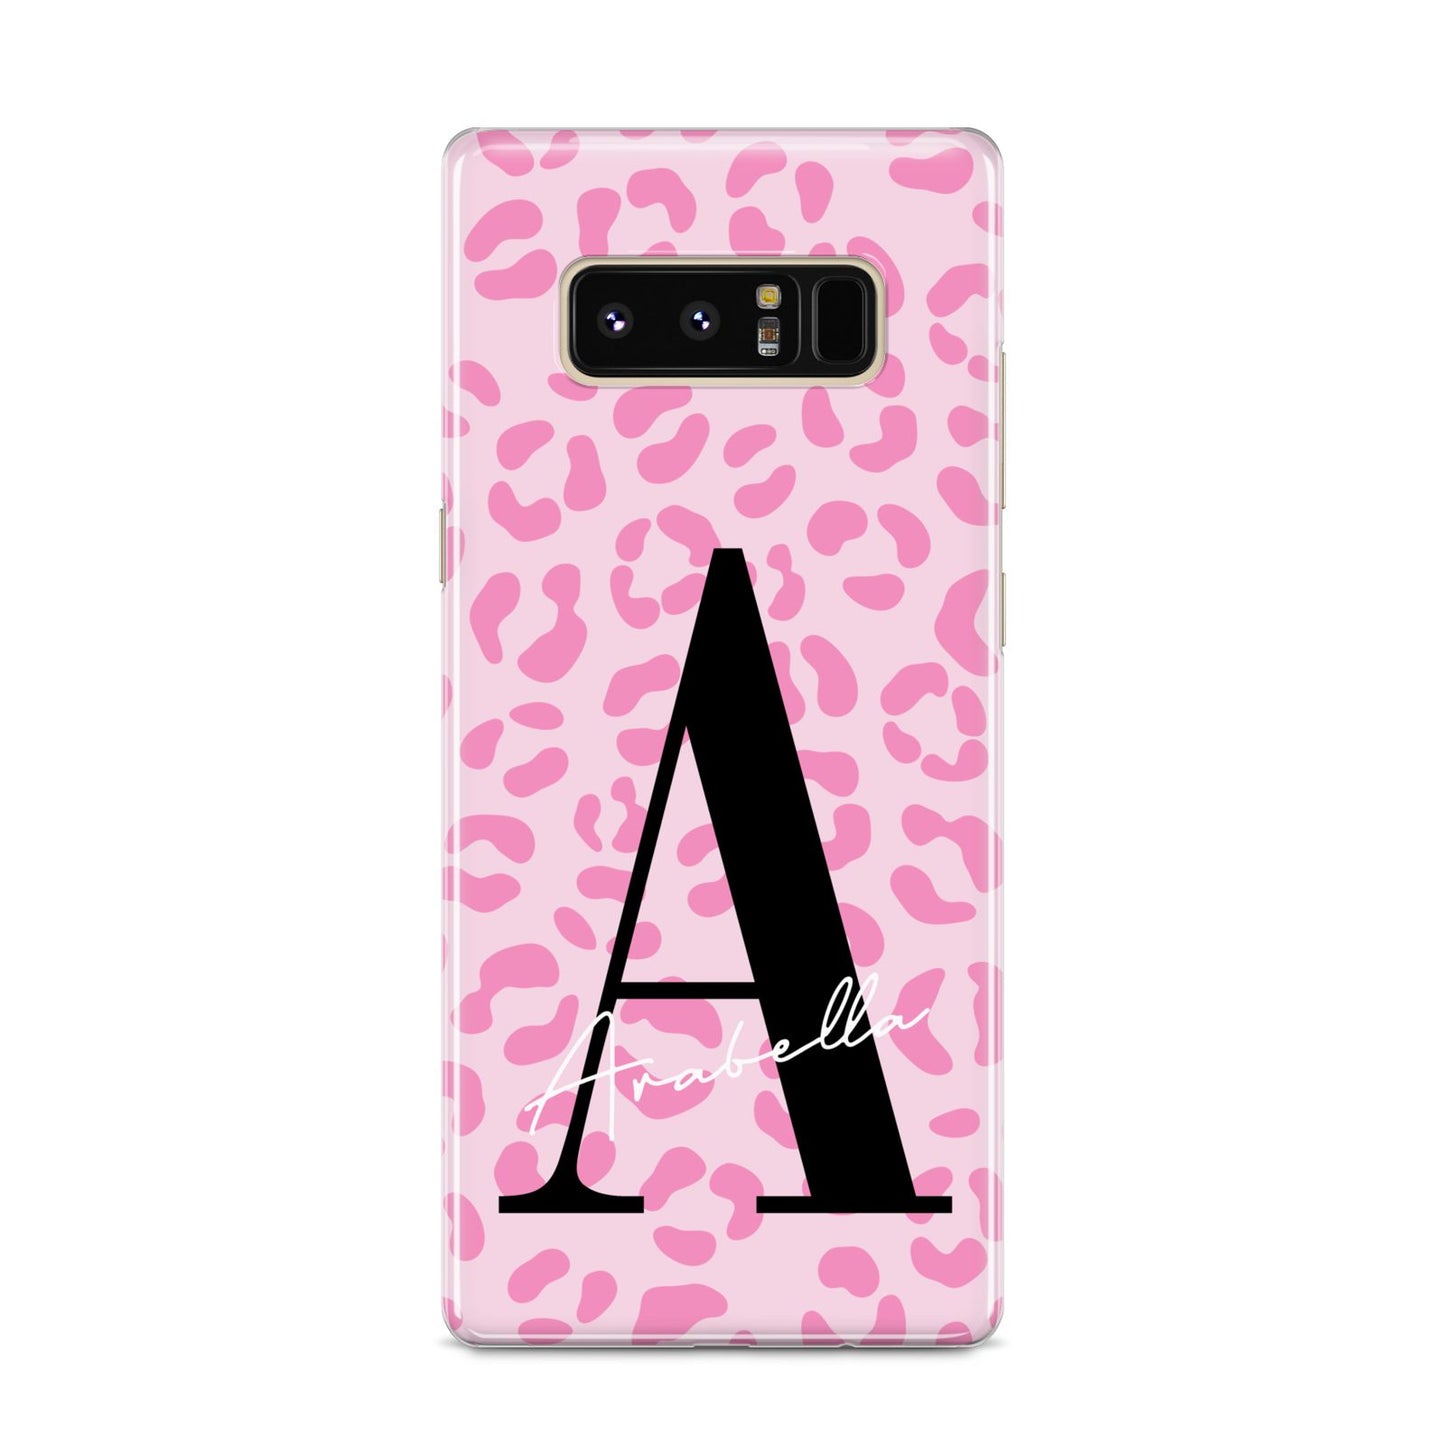 Personalised Pink Leopard Print Samsung Galaxy S8 Case